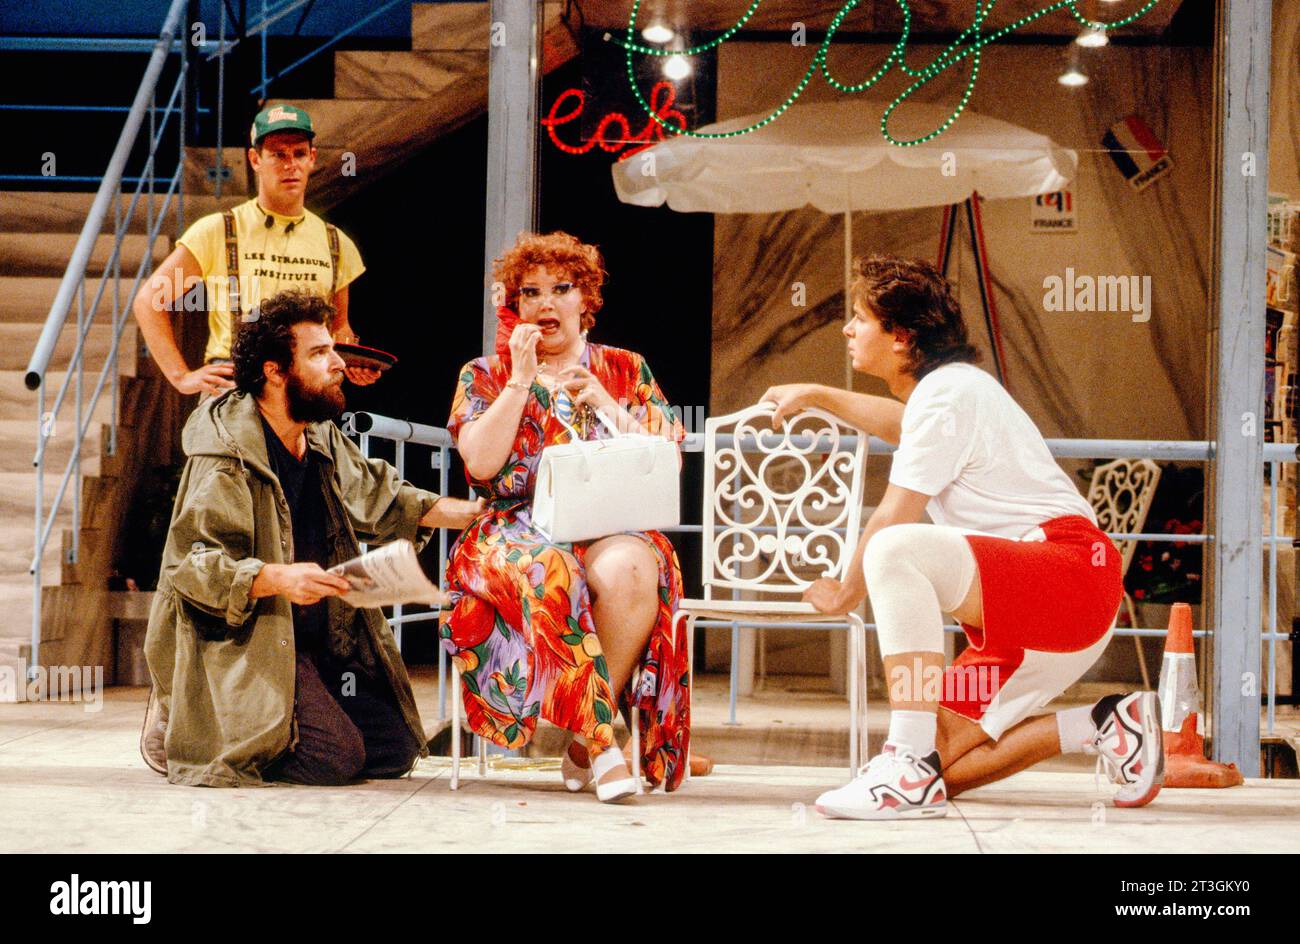 front, l-r: Mandy Patinkin (Martin), Patti Allison (Mrs Newman), Nicolas Colicos (Warren) in BORN AGAIN at the Chichester Festival Theatre, West Sussex, England  11/09/1990  music: Jason Carr  libretto: Julian Barry & Peter Hall  based on the play ‘Rhinoceros’ by Eugene Ionesco  musical director: John Owen Edwards  design: Gerald Scarfe  lighting: Paul Pyant  choreography: Gillian Gregory  director: Peter Hall Stock Photo